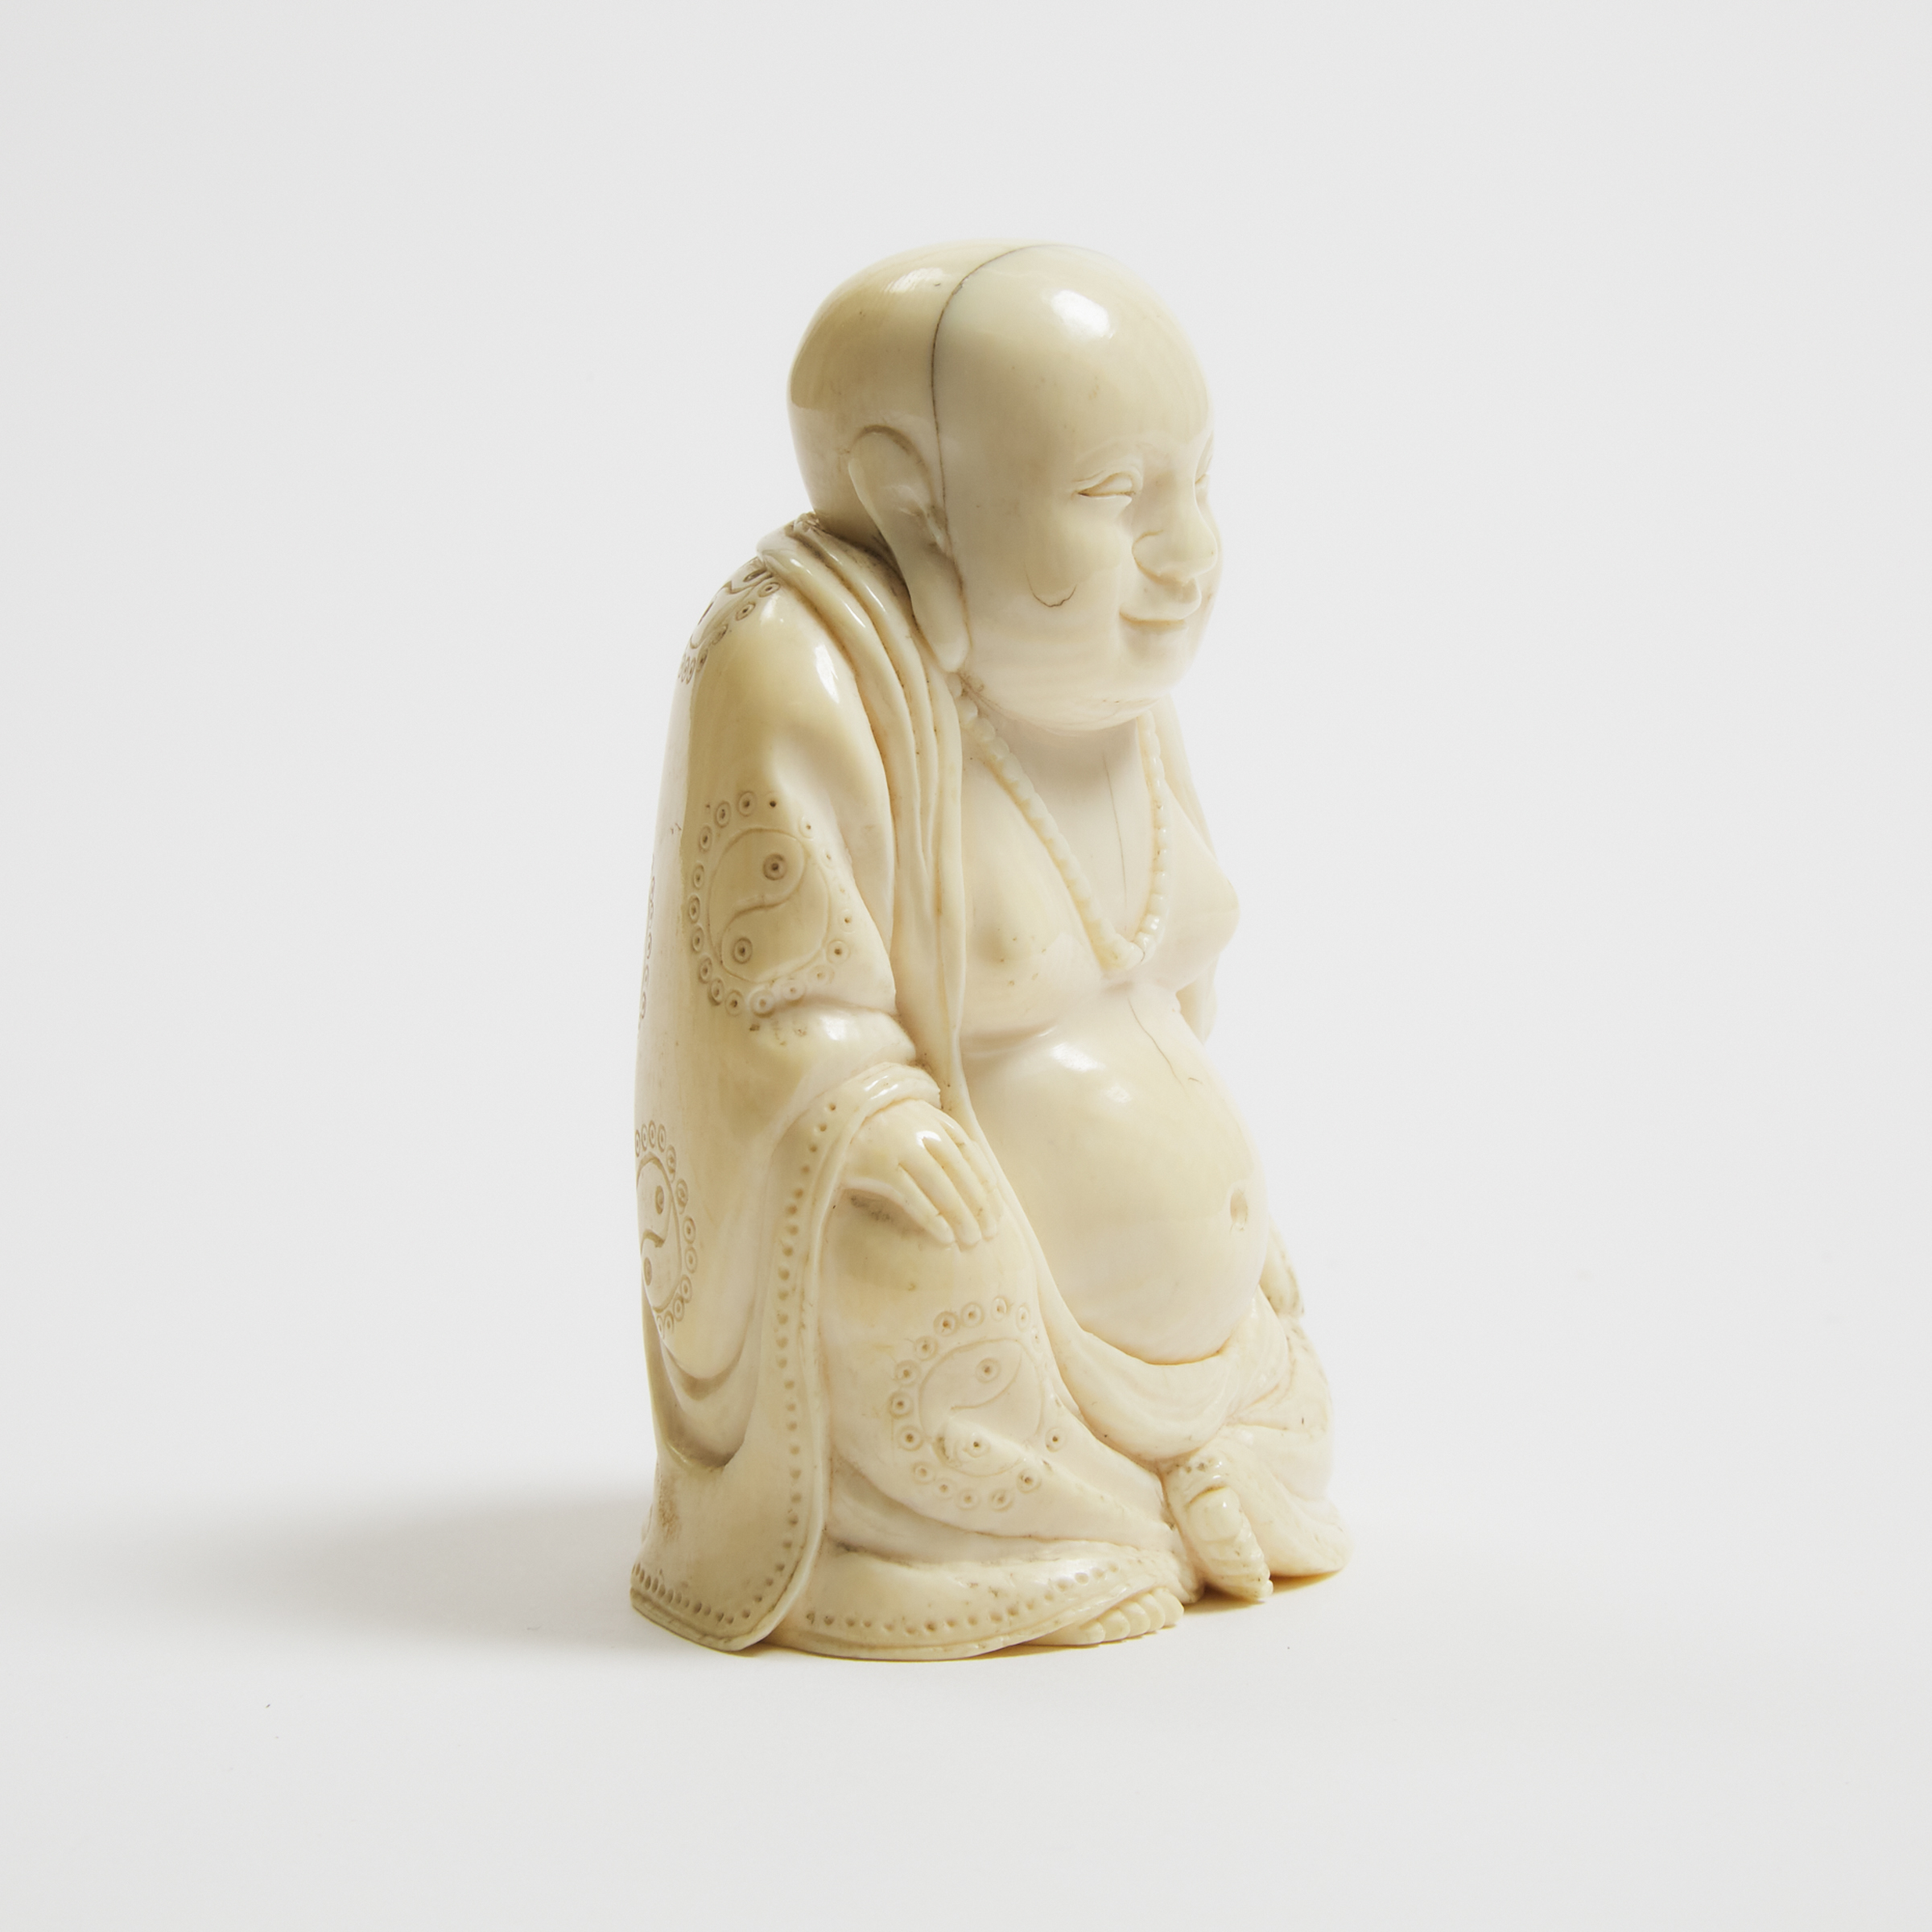 An Ivory Figure of the Buddha Maitreya, Republican Period, Early 20th Century